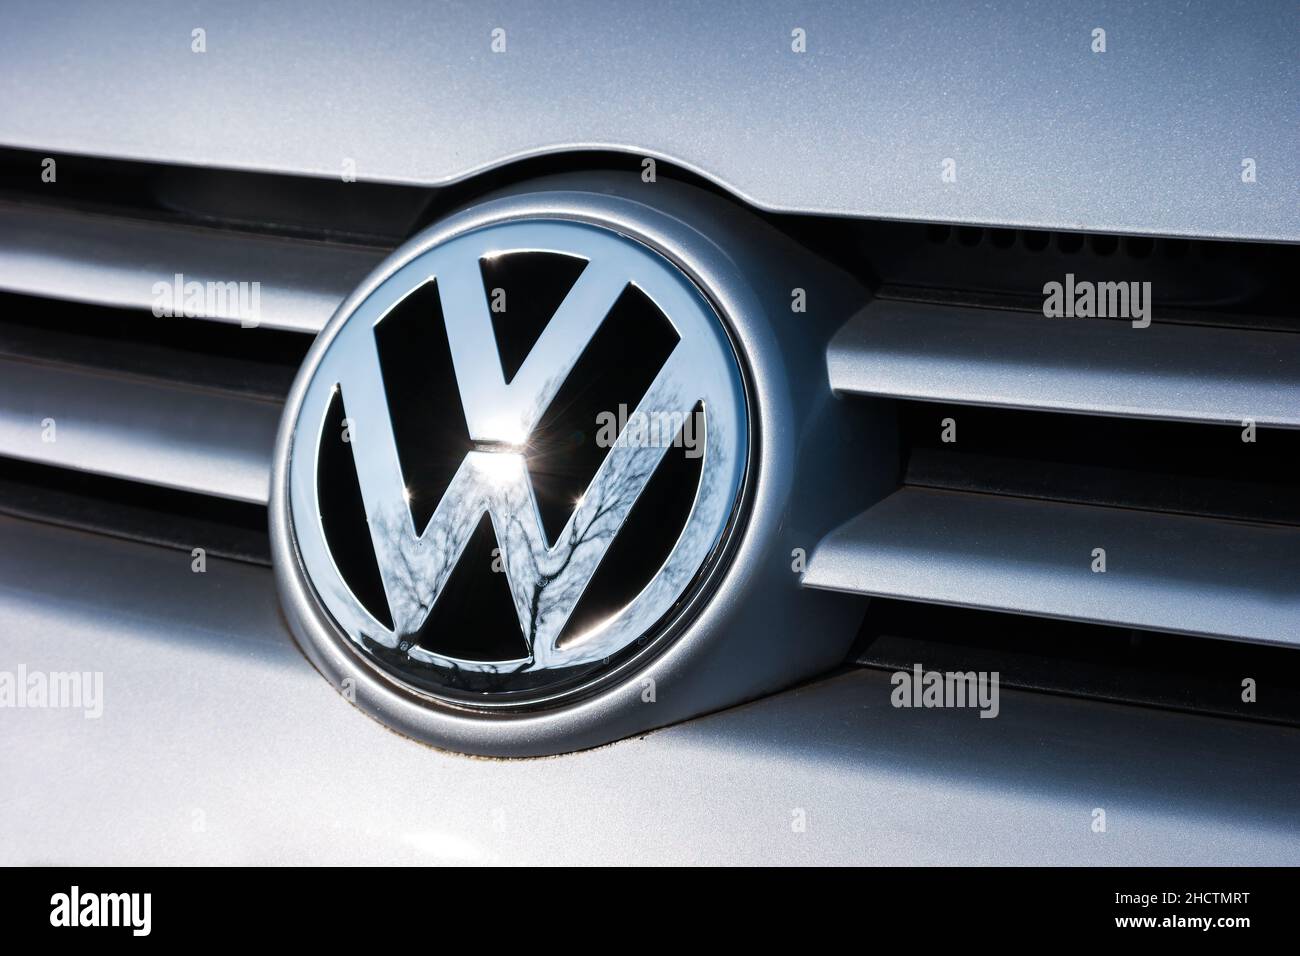 Volkswagen VW plate logo on a silver car. Volkswagen is a famous European car manufacturer company based on Germany. Stock Photo